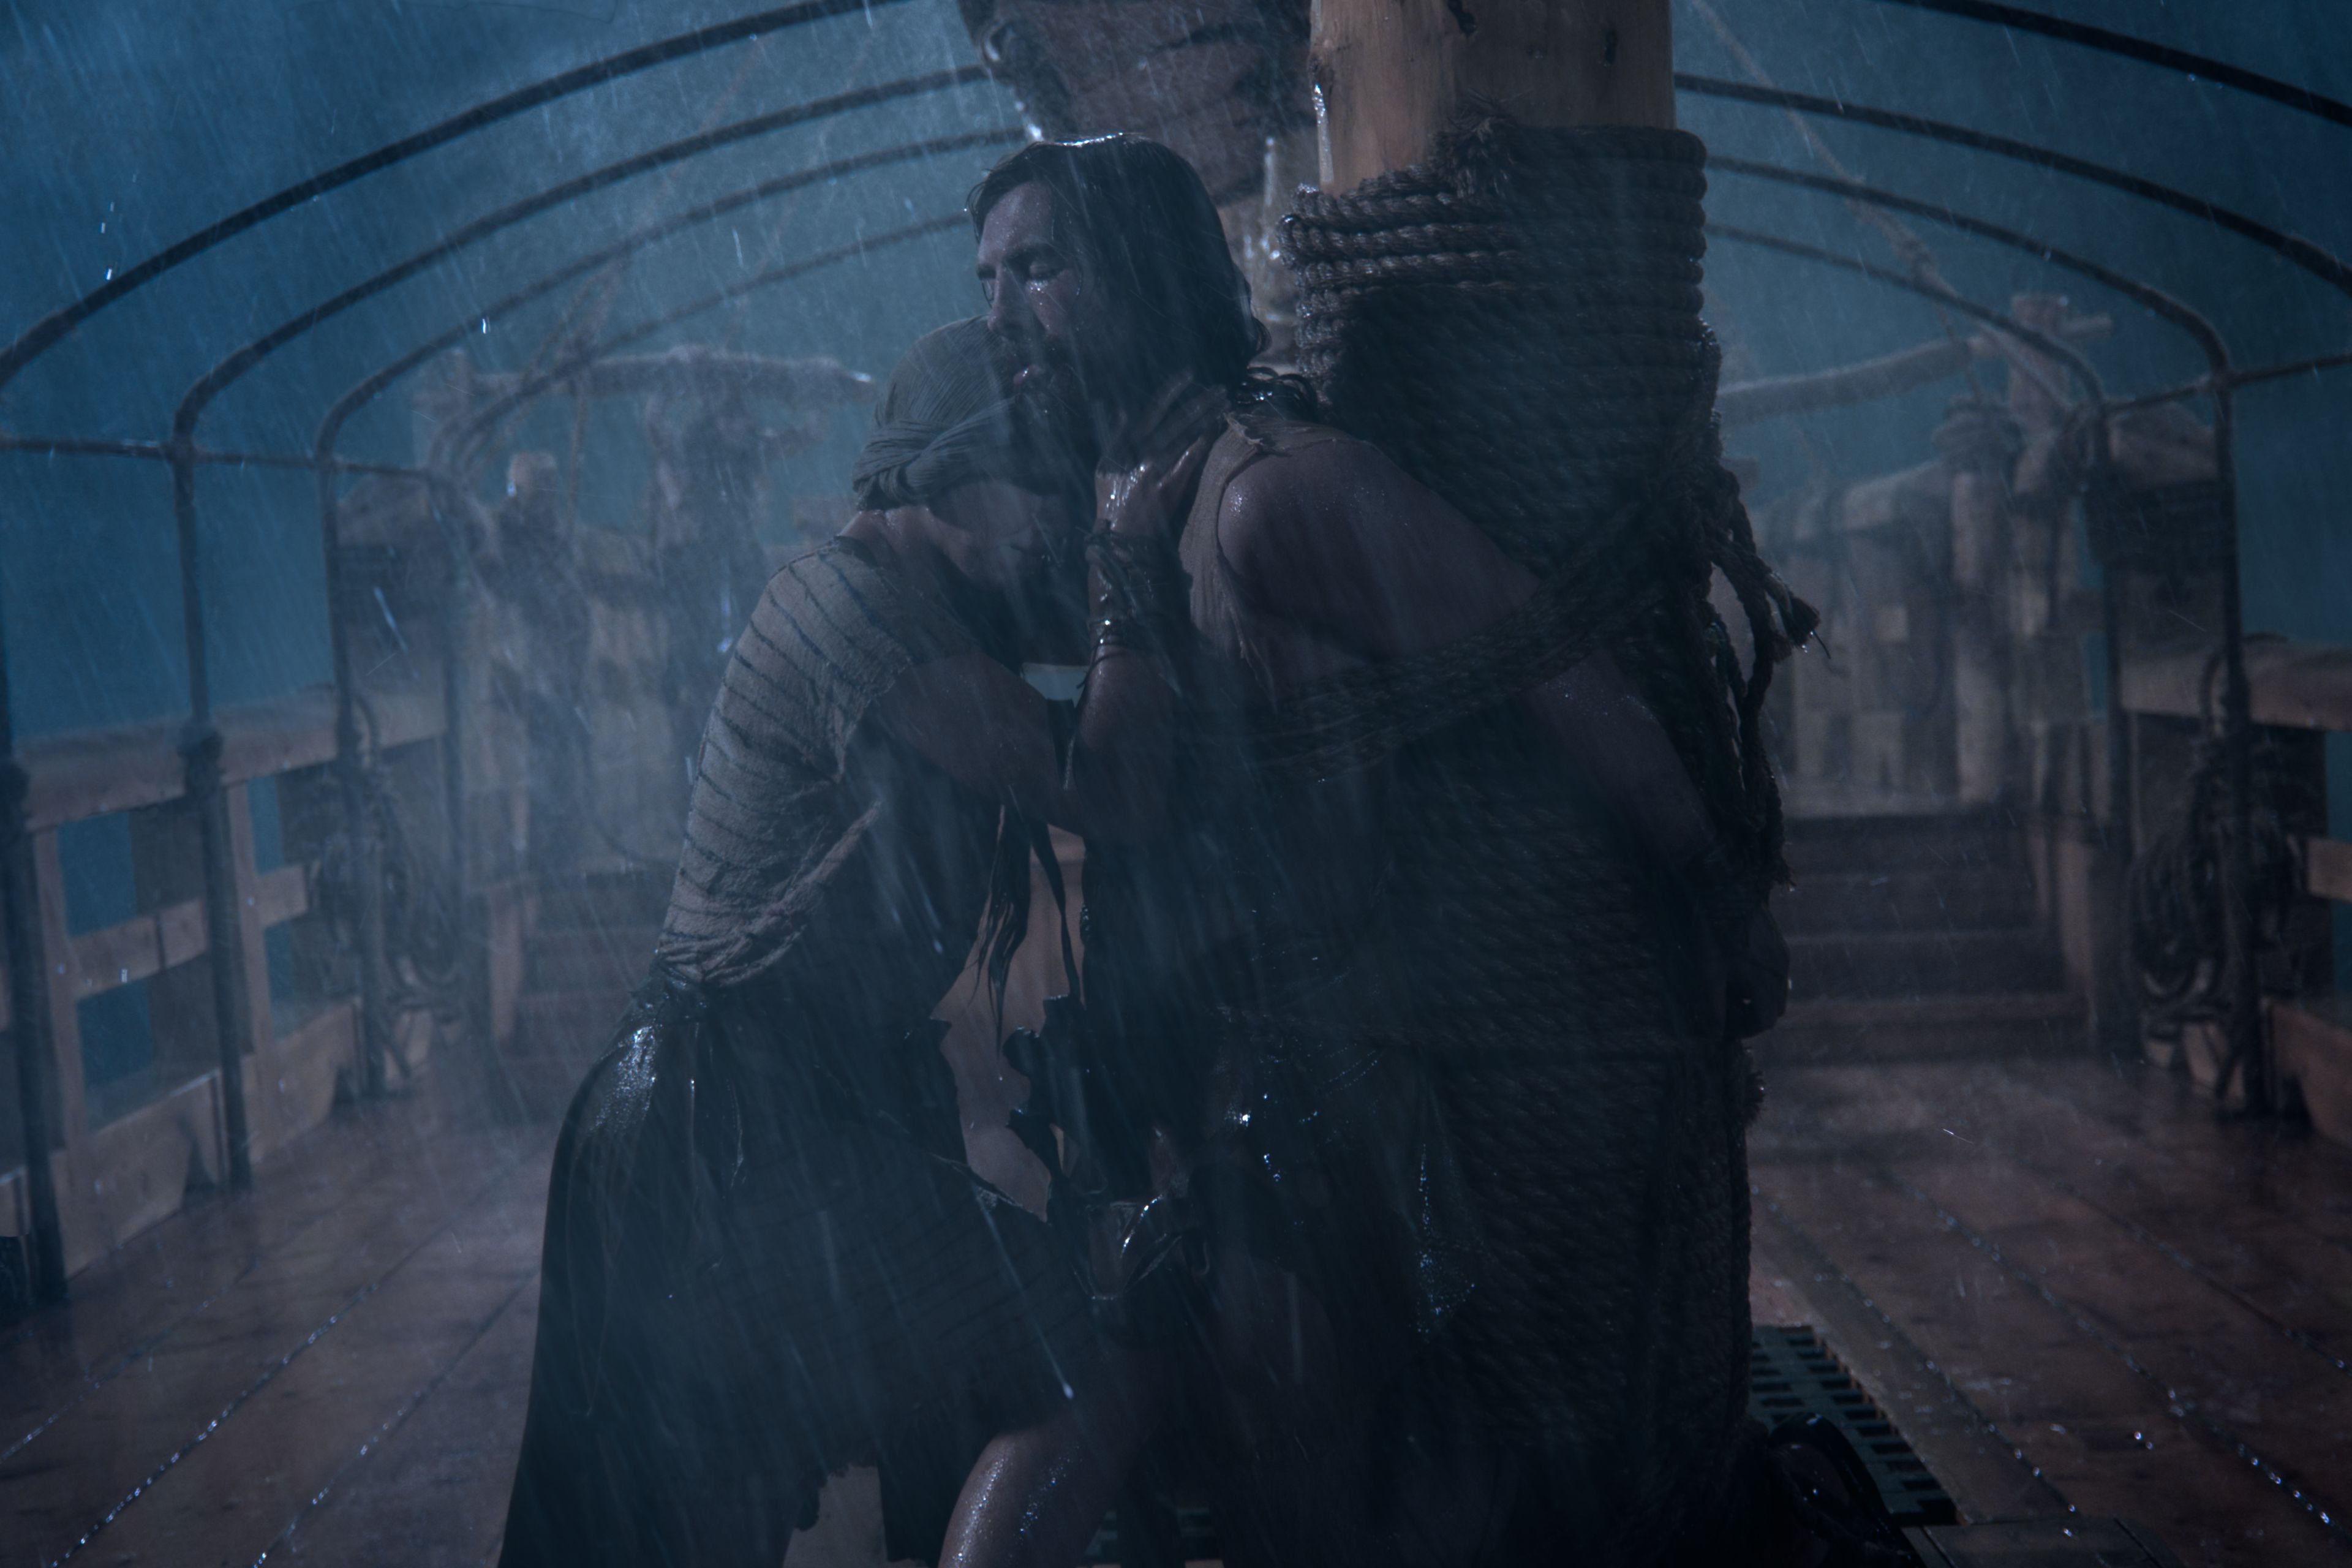 Nephi's wife prays during the storm and comforts Nephi.